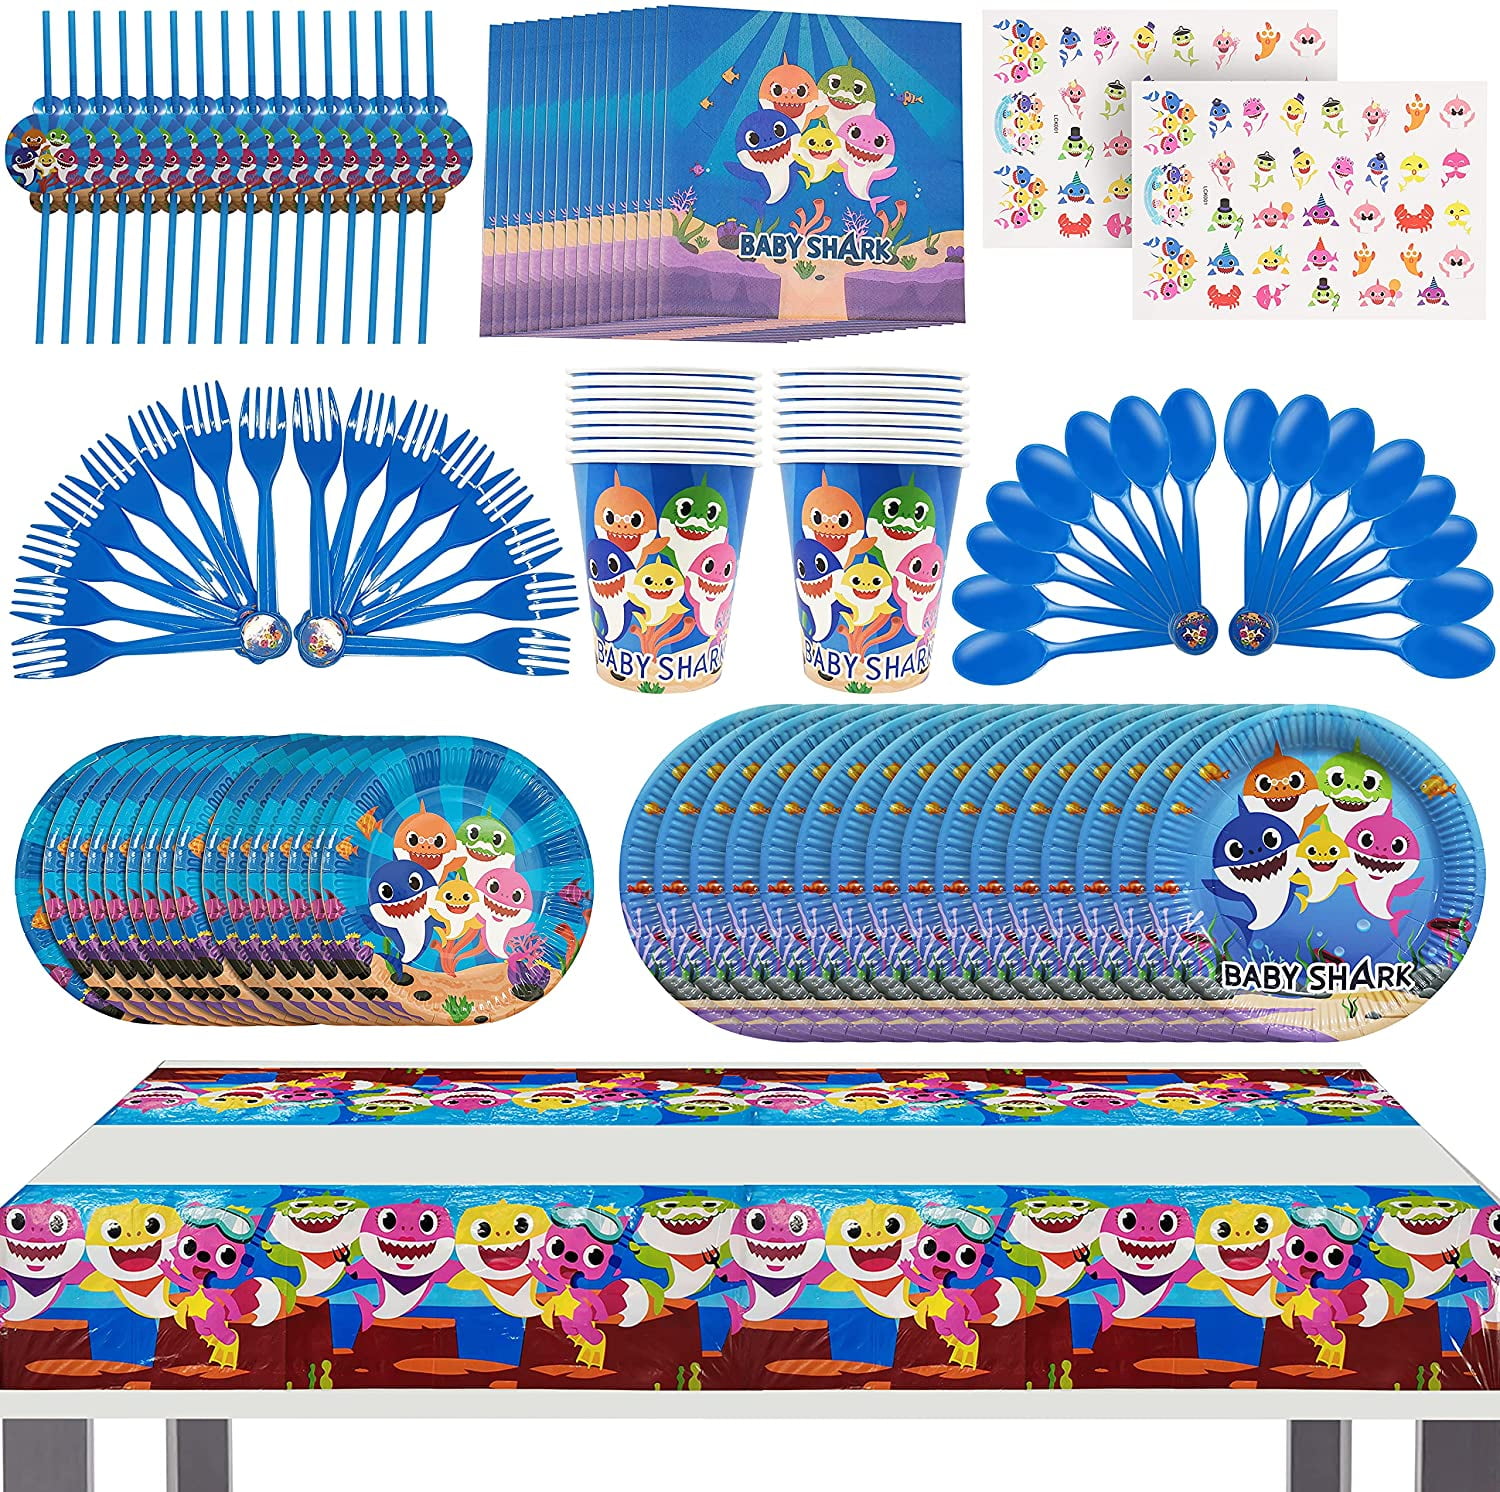 Details about   Shuttle Pen with 10 Colors Favor Party Gift Bag Fillers Prize Prizes Assortment 